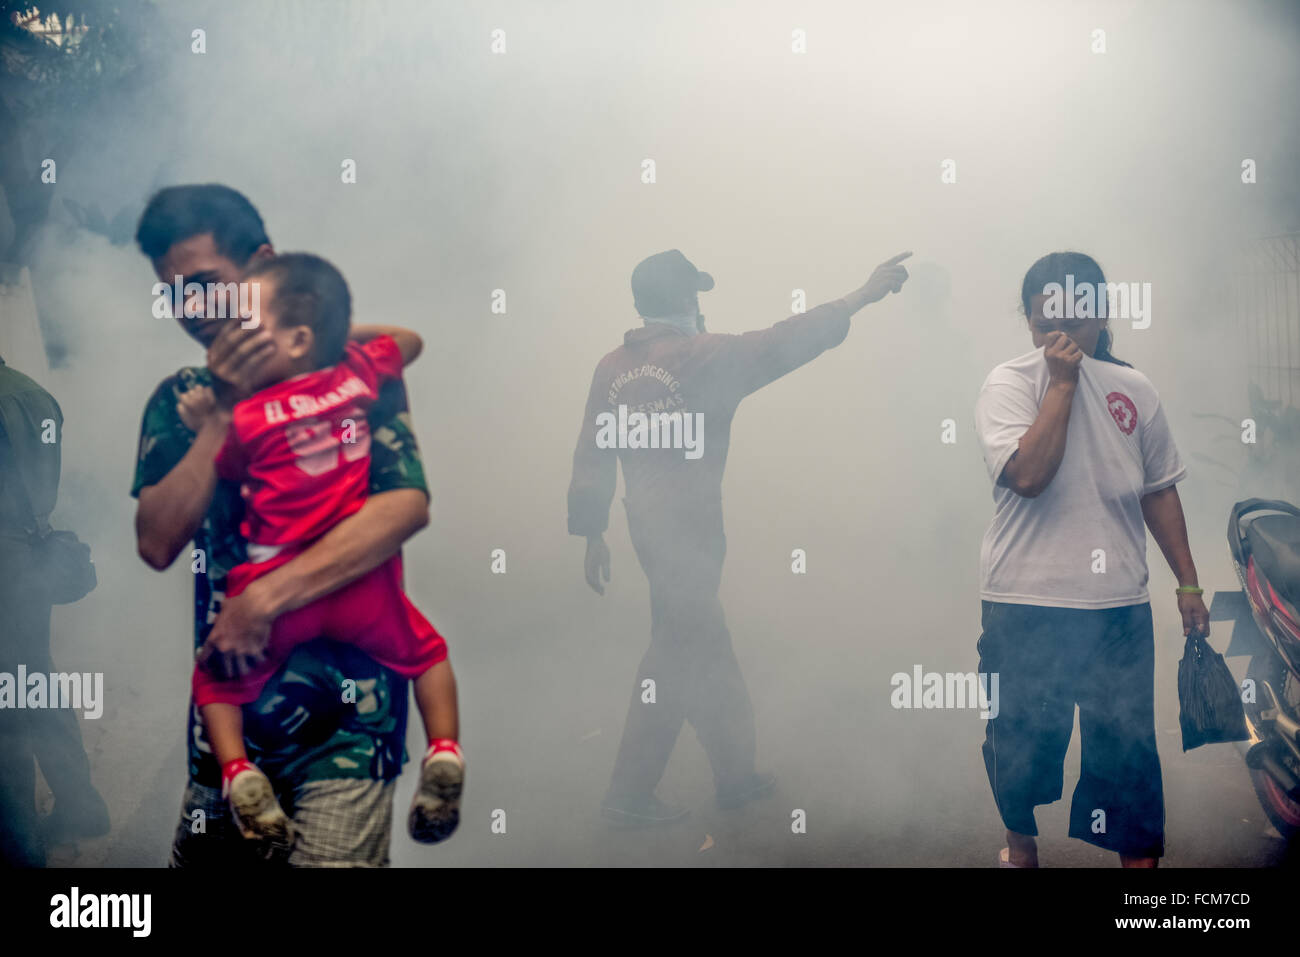 Workers from the Jakarta health office launch insecticide fogging session to fight dengue fever threat. Stock Photo